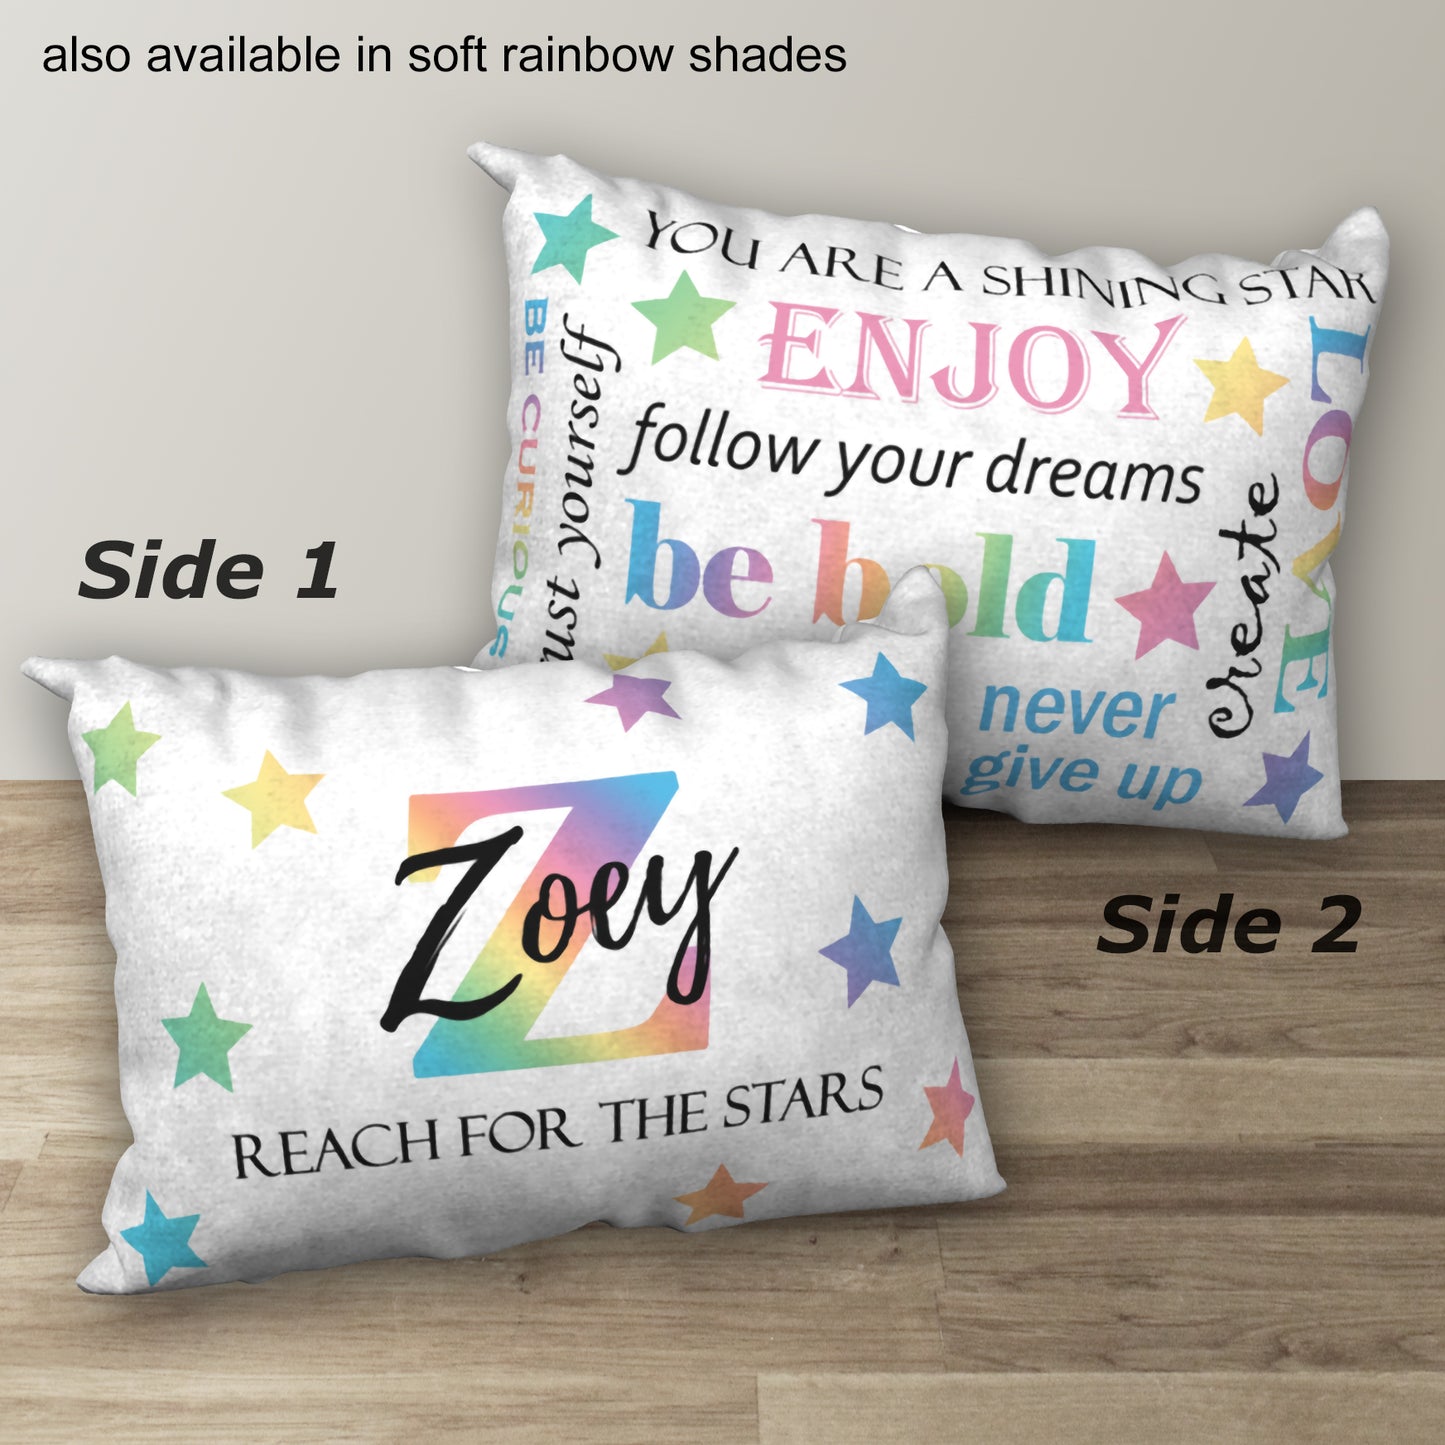 Personalized Primary Rainbow Name Pillow REACH FOR THE STARS, 20"x14"